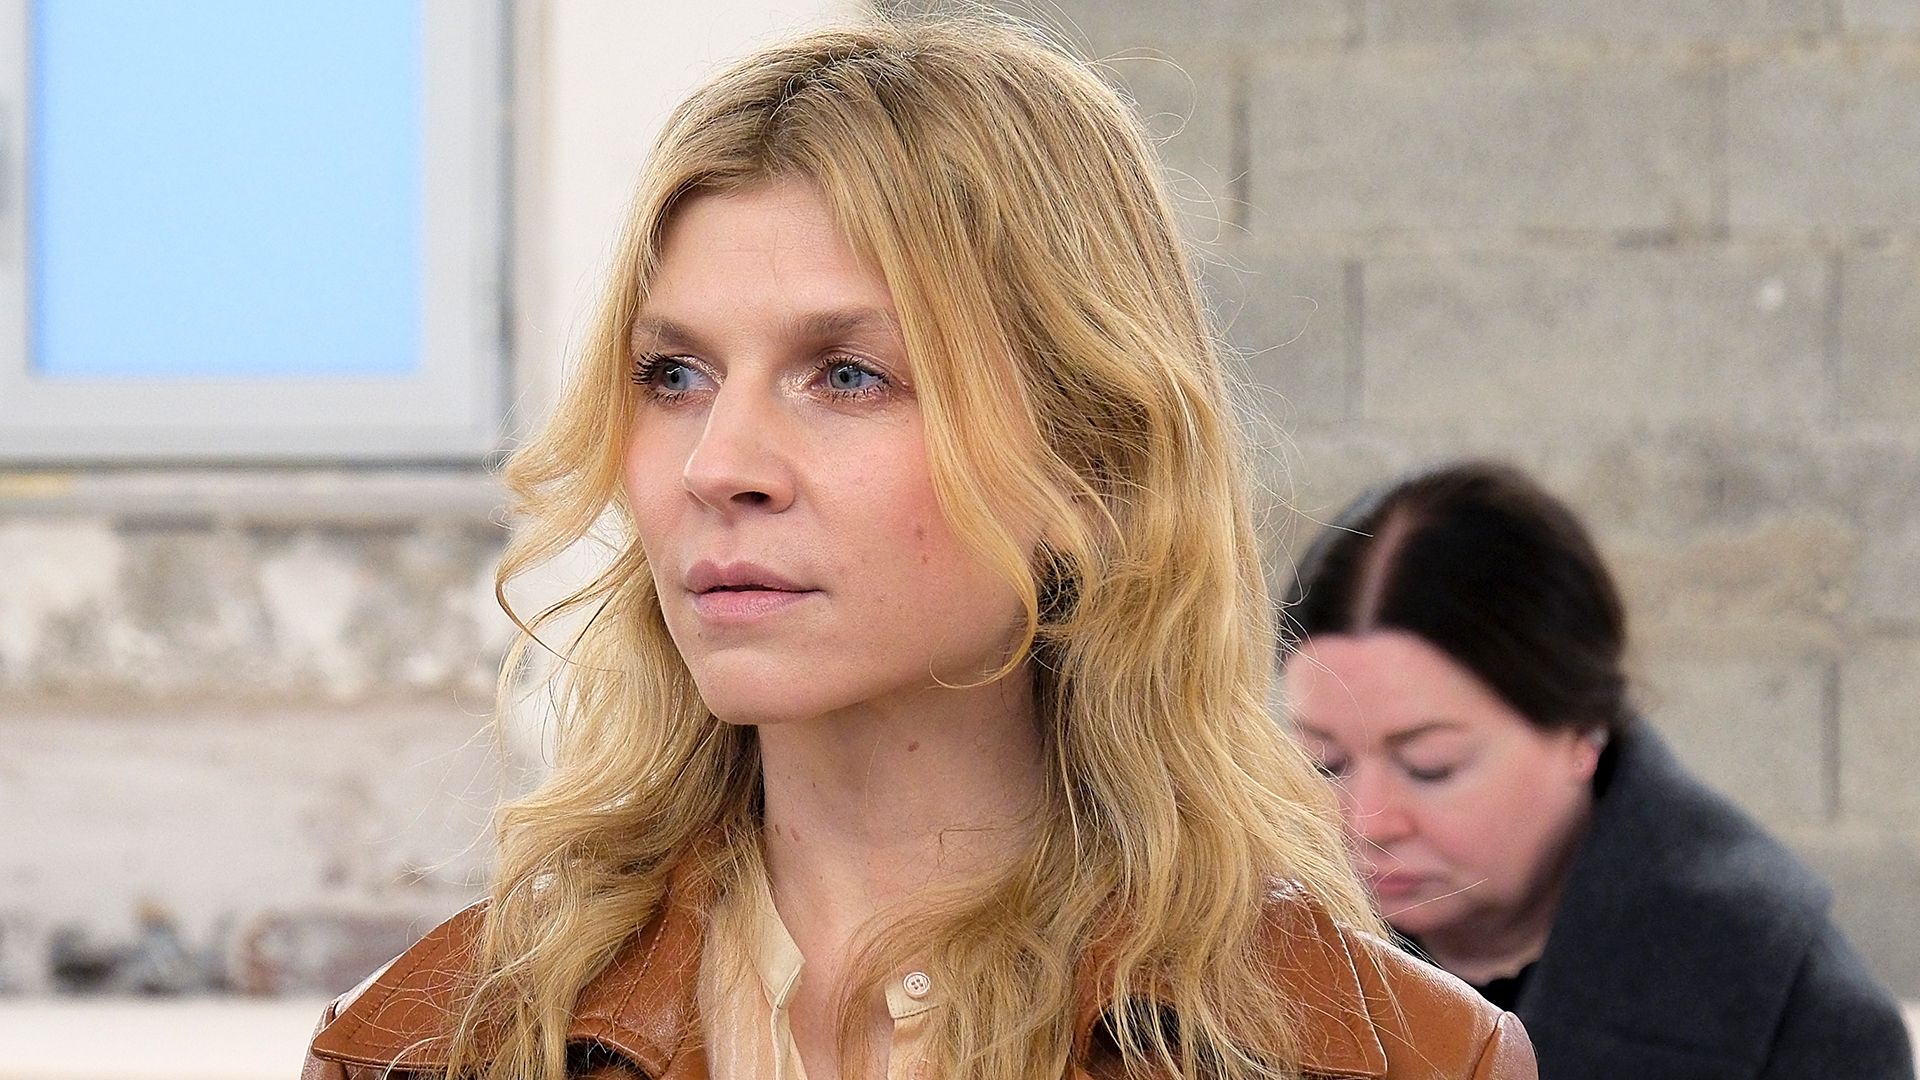  Actress Clemence Poesy at the Chloe fashion show in Paris